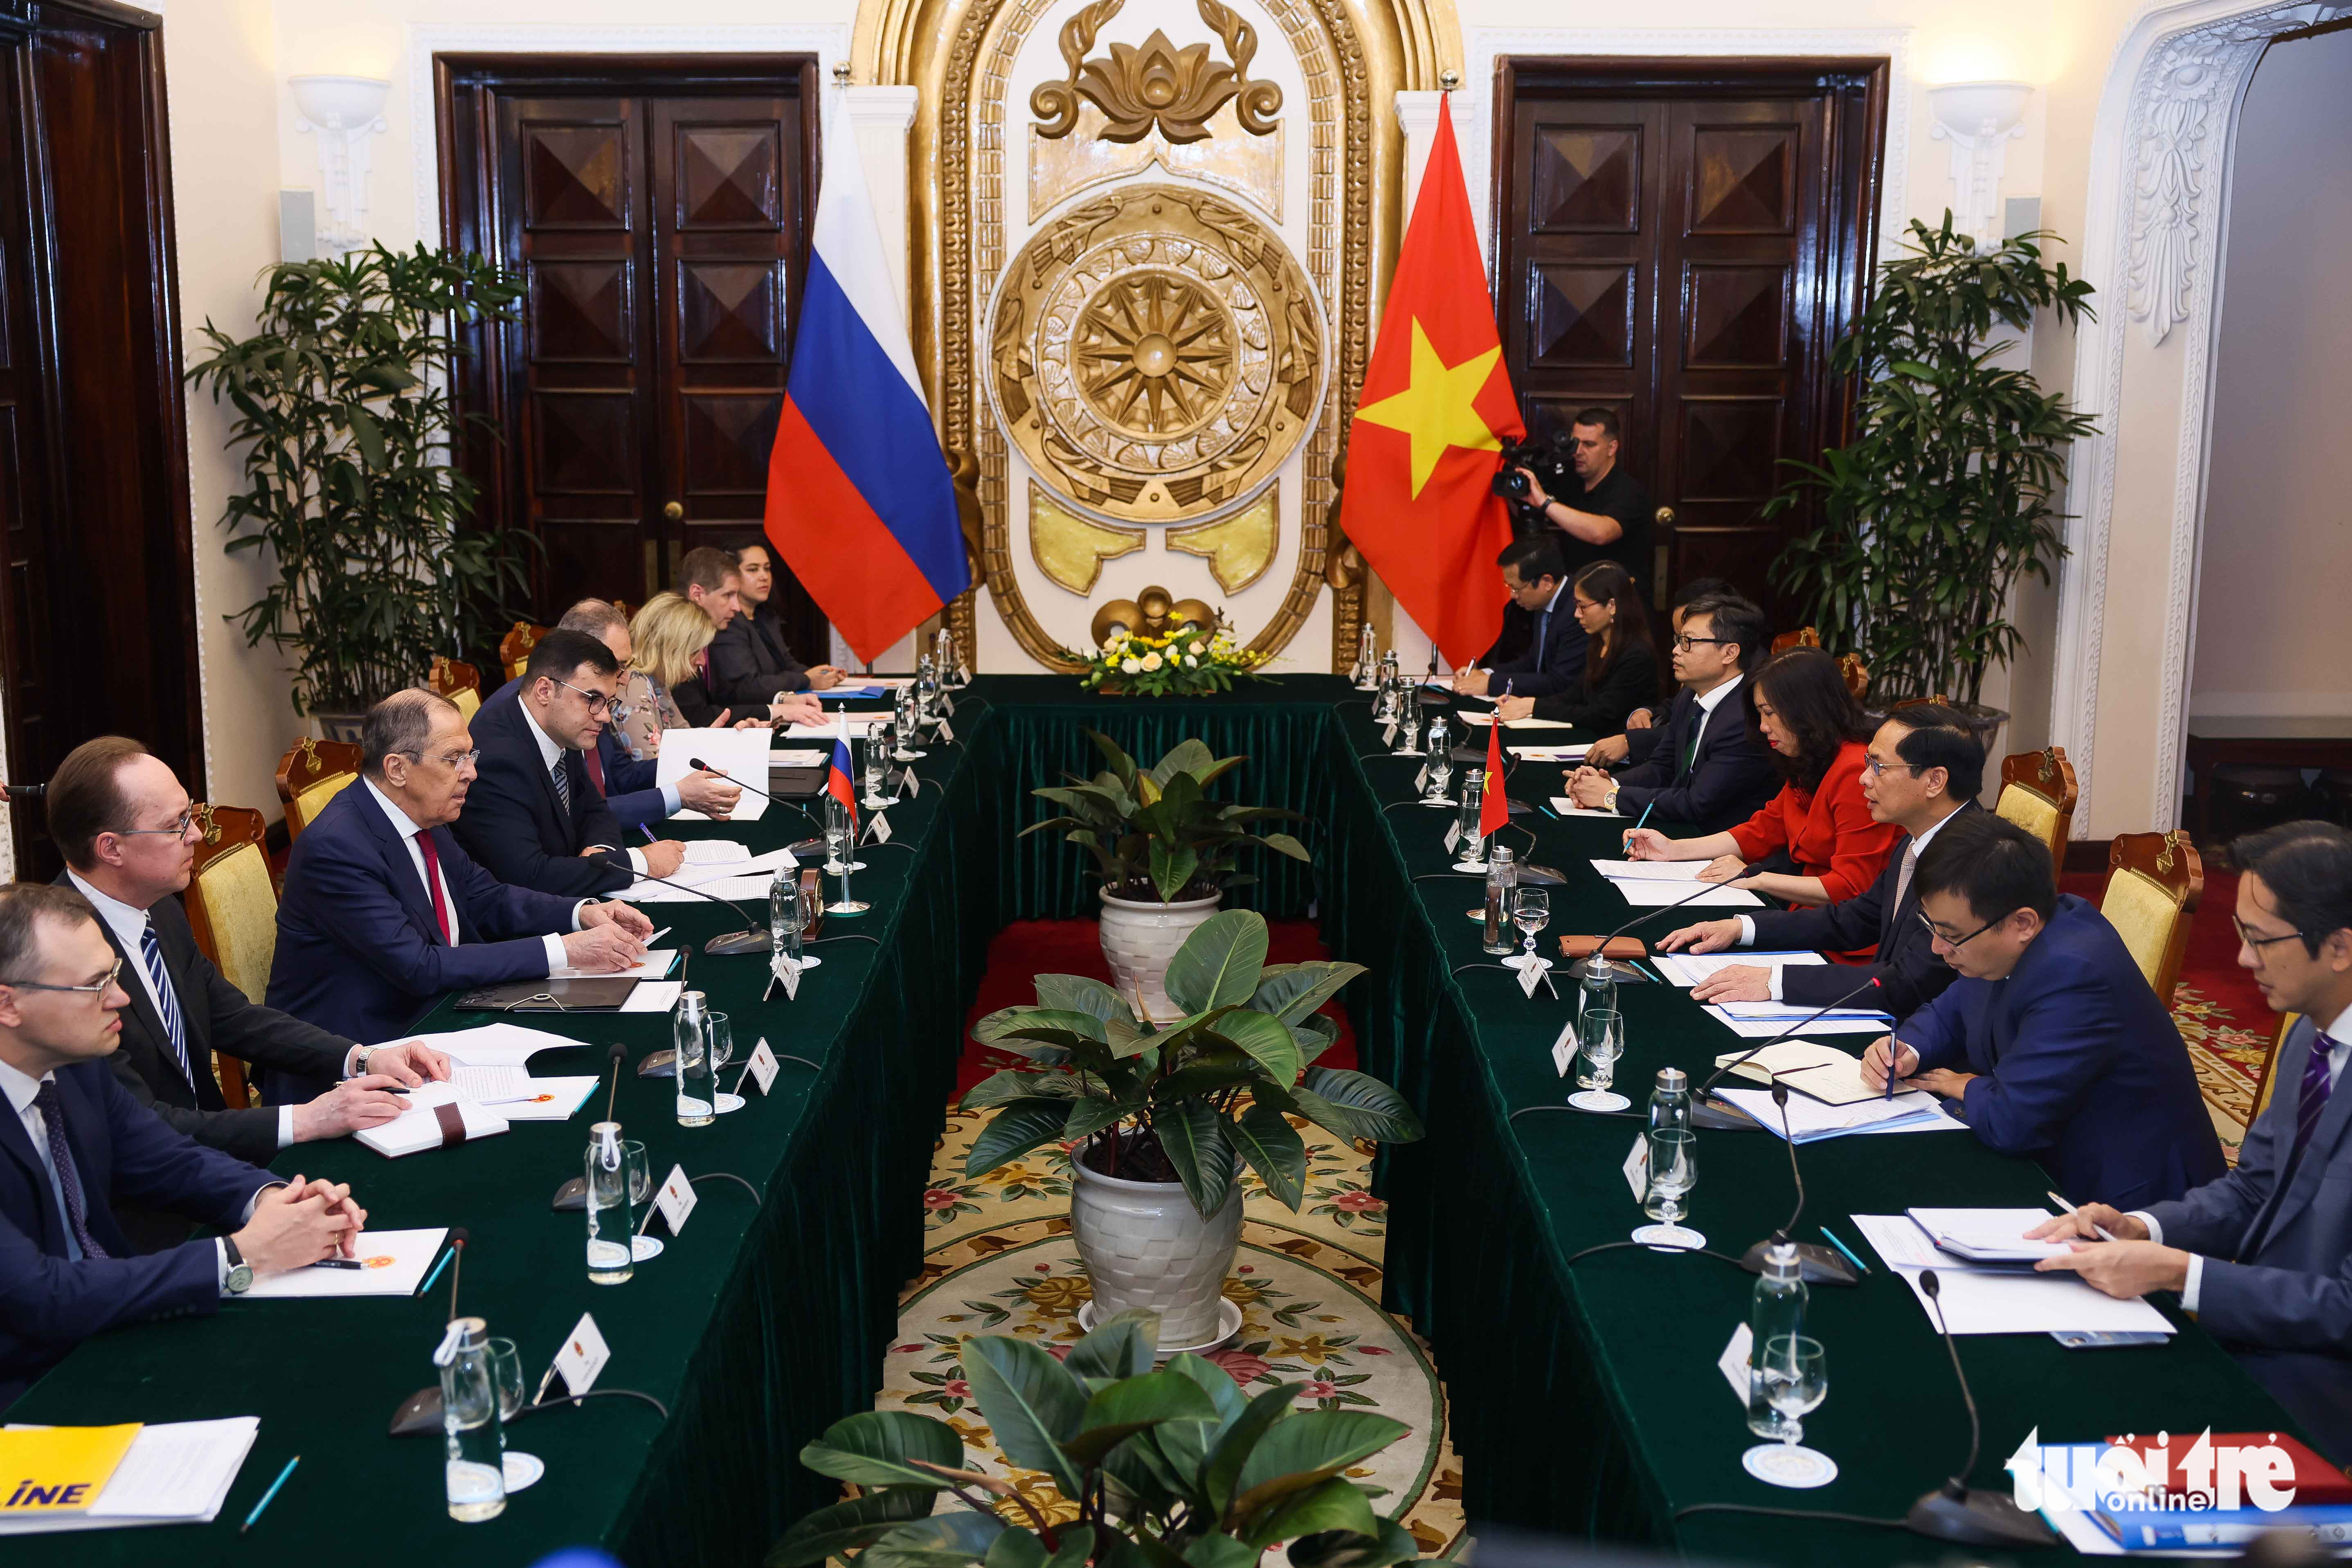 Russian Minister of Foreign Affairs Sergey Lavrov and Vietnamese Minister of Foreign Affairs Bui Thanh Son join talks in Hanoi, July 6, 2022. Photo: Nguyen Khanh / Tuoi Tre